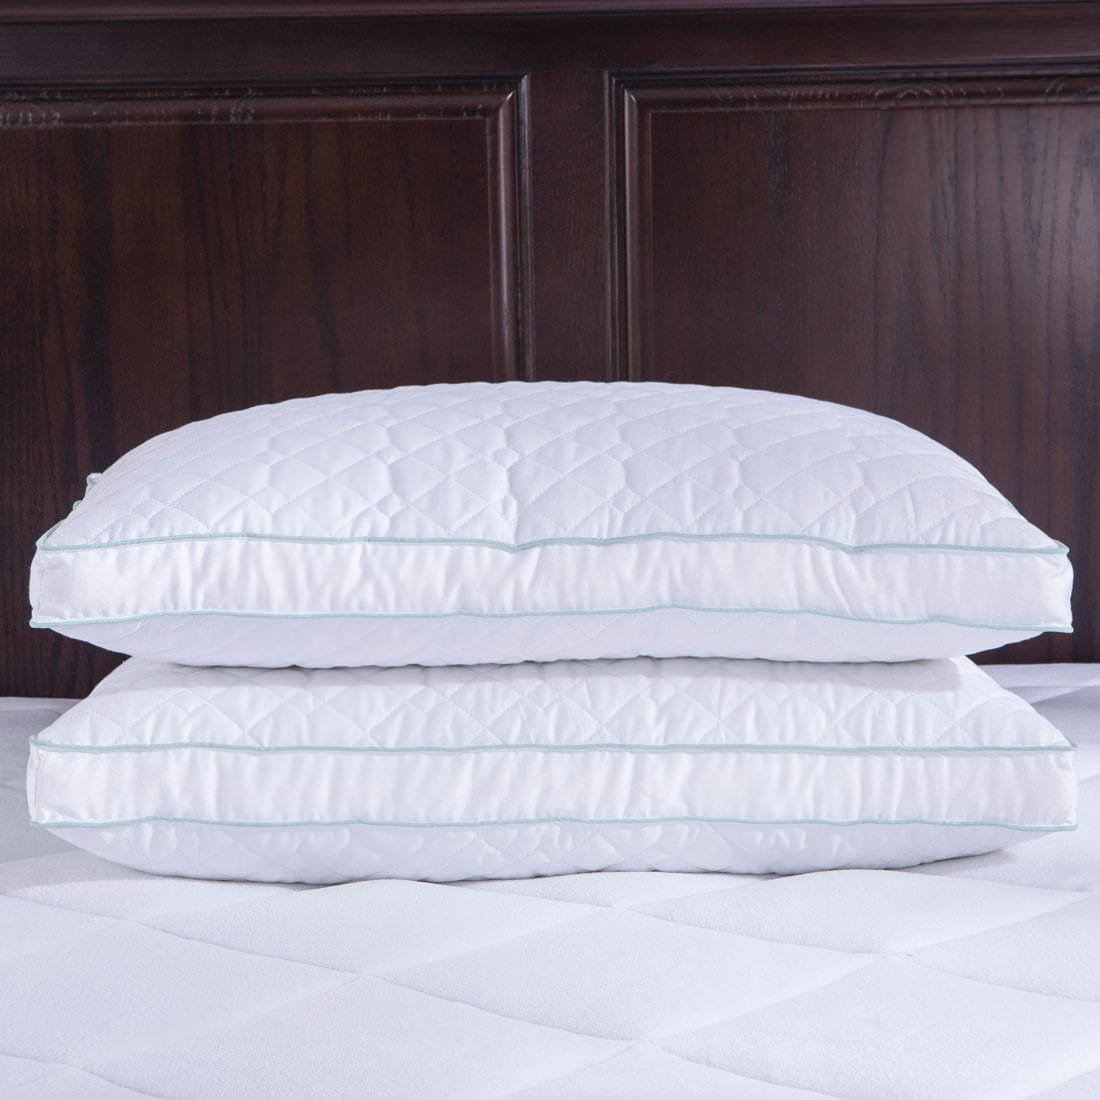 Puredown Goose Feathers and Down Pillow for Sleeping Gusseted Bed